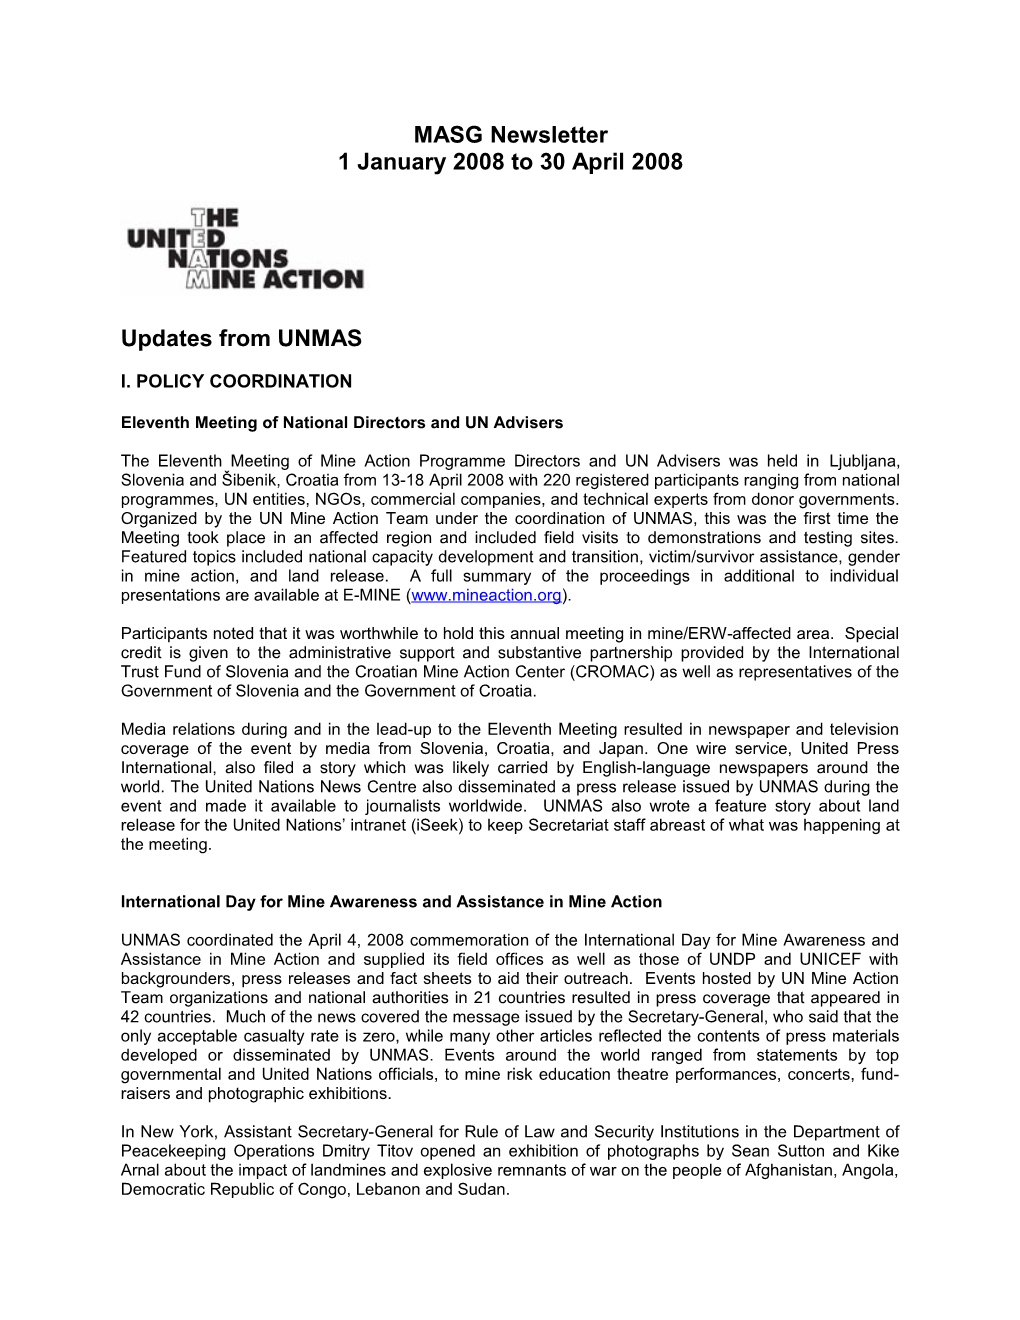 Inputs for MASG Newsletter First Quarter 2008